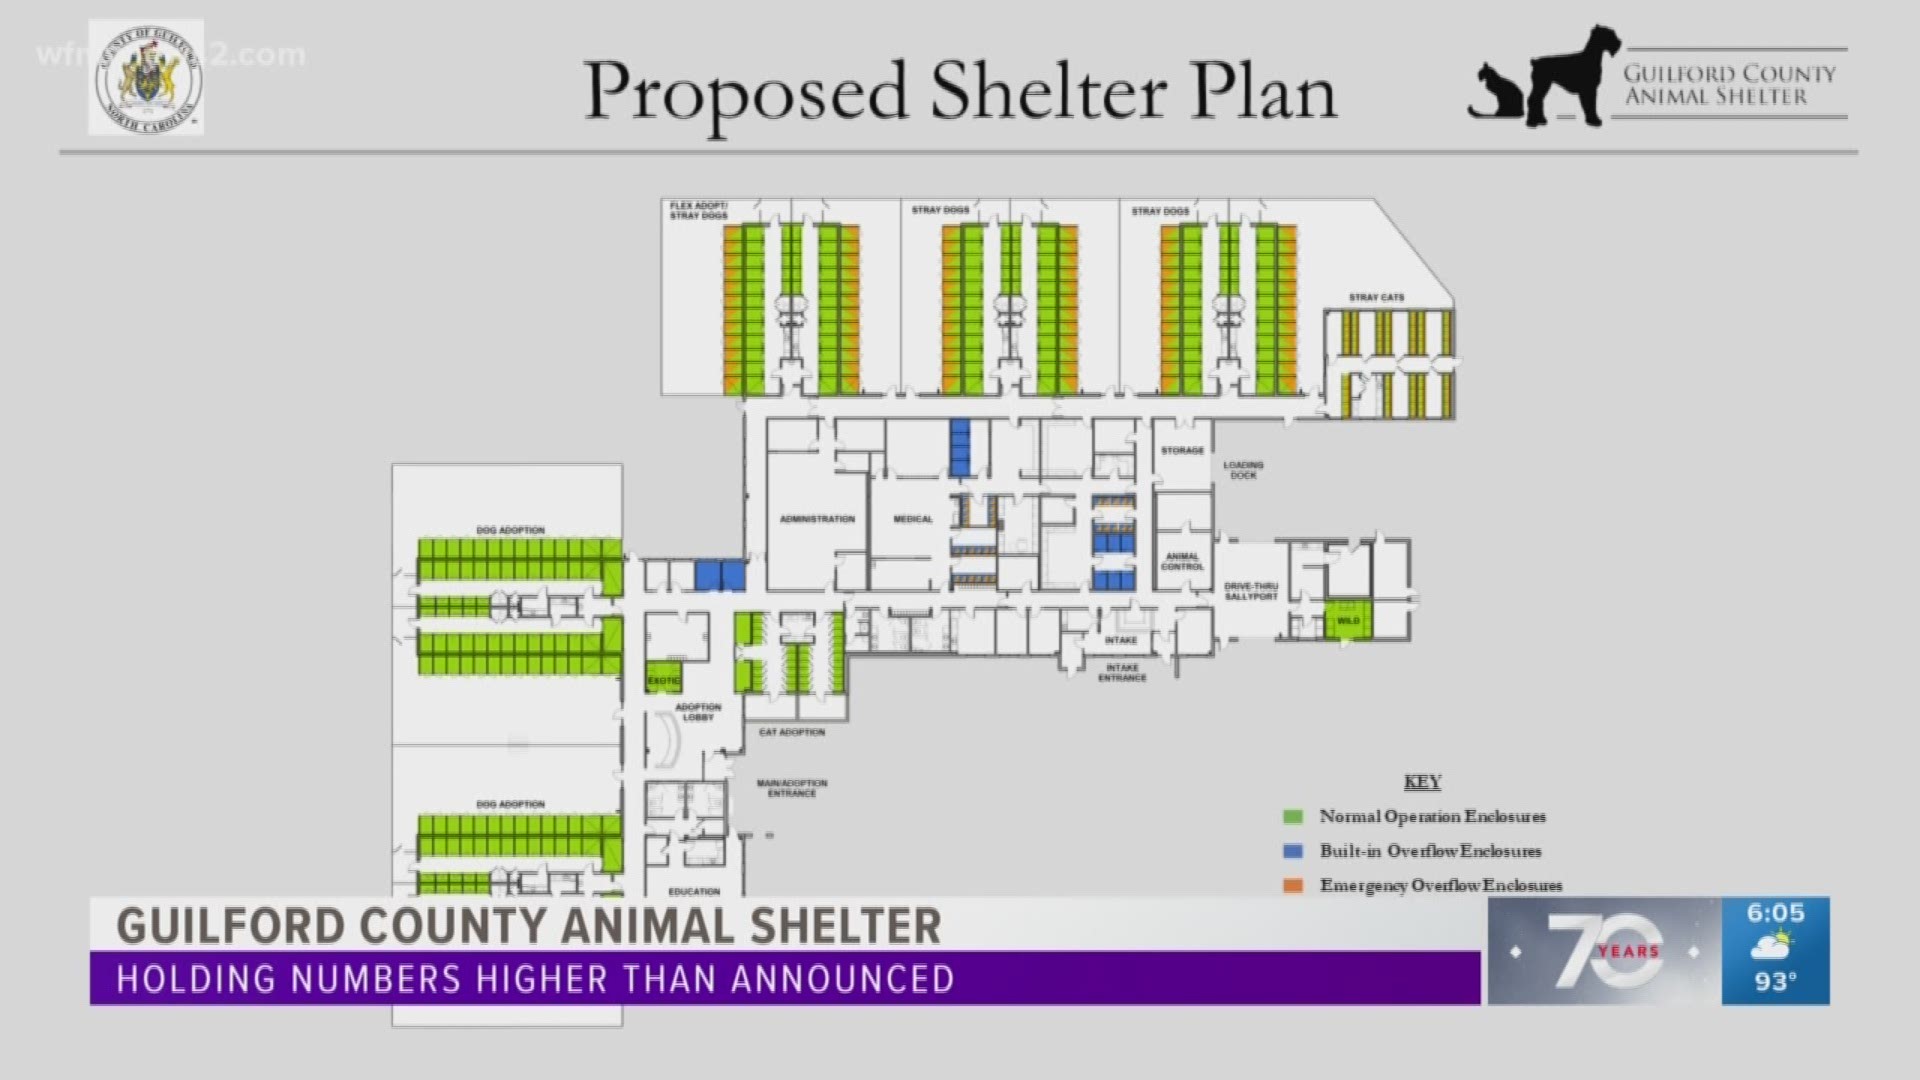 Director Jorge Ortega previously said the shelter's capacity would be around 335.
But at Thursday's Guilford County commissioners meeting, Ortega told board members it would hold 510.